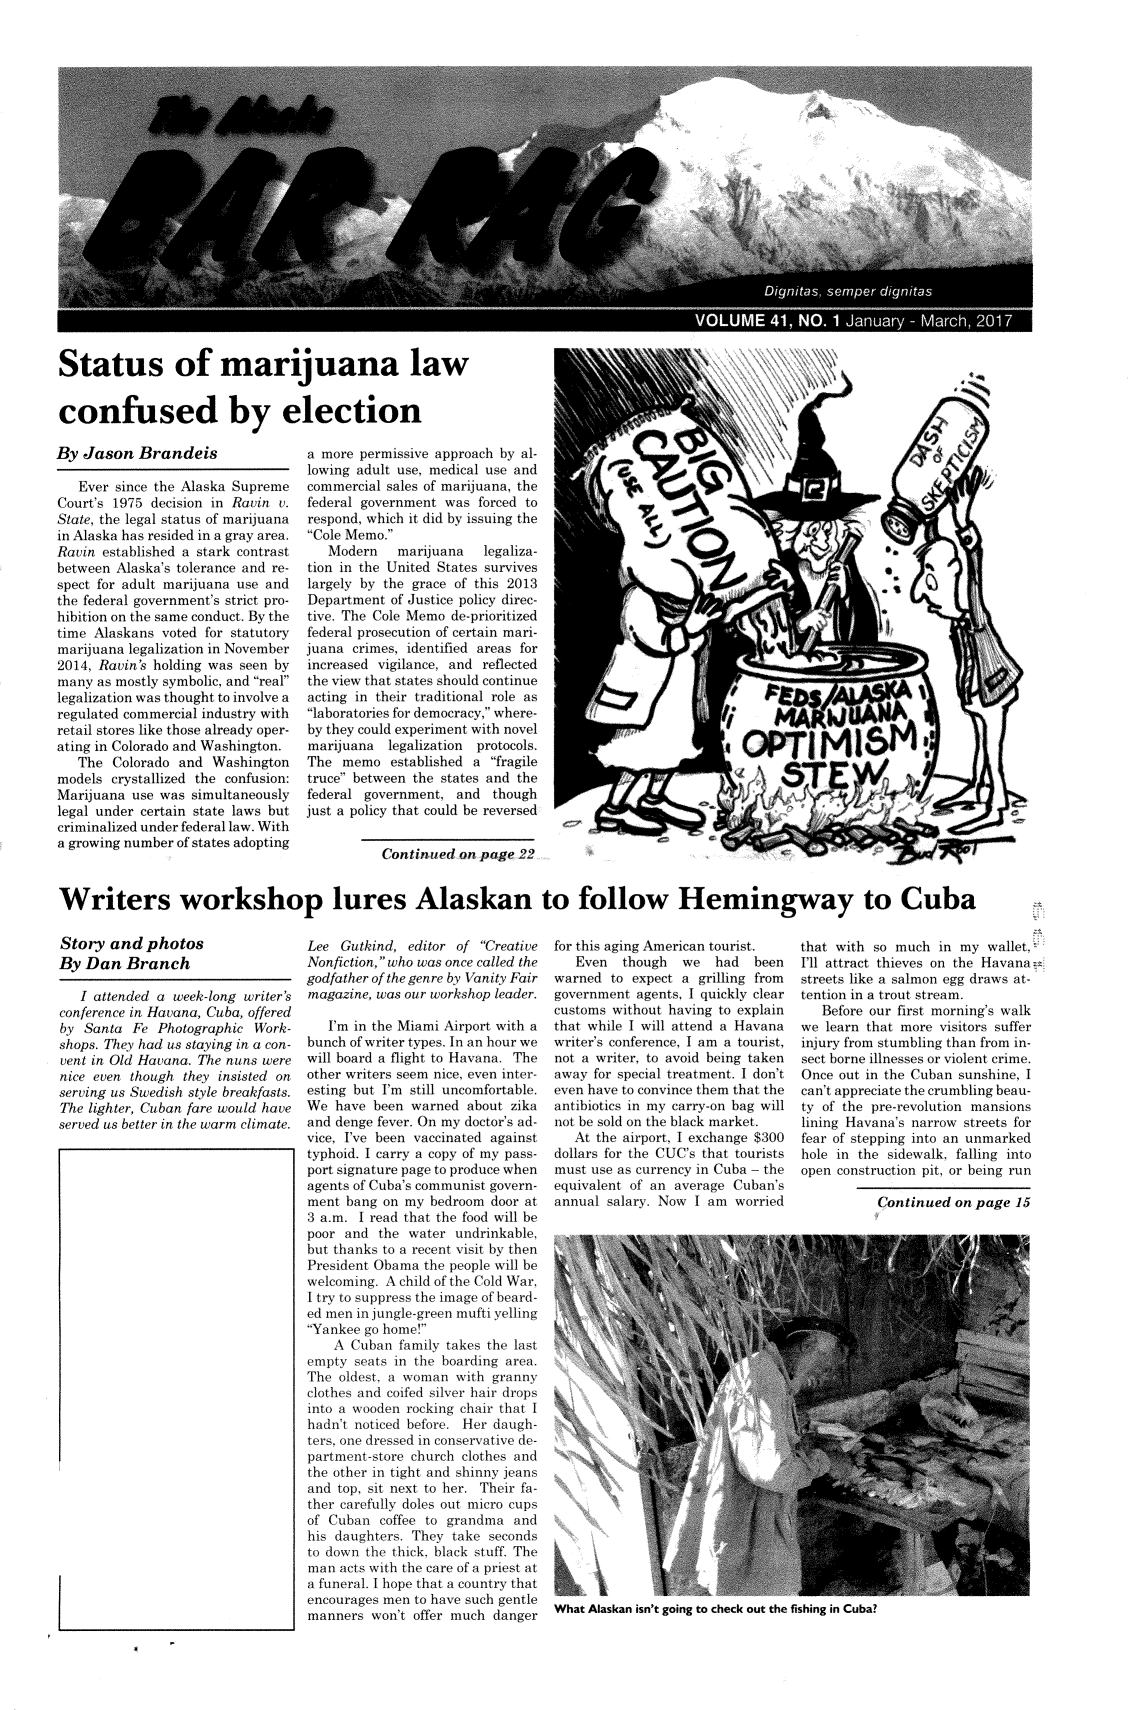 handle is hein.barjournals/askabar0041 and id is 1 raw text is: 






















Status of marijuana law


confused by election


By  Jason   Brandeis

   Ever since the Alaska Supreme
Court's 1975  decision in Ravin v.
State, the legal status of marijuana
in Alaska has resided in a gray area.
Ravin  established a stark contrast
between  Alaska's tolerance and re-
spect for adult marijuana use and
the federal government's strict pro-
hibition on the same conduct. By the
time Alaskans  voted for statutory
marijuana legalization in November
2014, Ravin's holding was seen by
many  as mostly symbolic, and real
legalization was thought to involve a
regulated commercial industry with
retail stores like those already oper-
ating in Colorado and Washington.
   The  Colorado  and Washington
models  crystallized the confusion:
Marijuana  use was simultaneously
legal under certain state laws but
criminalized under federal law. With
a growing number of states adopting


a more  permissive approach by al-
lowing adult use, medical use and
commercial sales of marijuana, the
federal government  was  forced to
respond, which it did by issuing the
Cole Memo.
   Modern    marijuana   legaliza-
tion in the United States survives
largely by the grace of this 2013
Department  of Justice policy direc-
tive. The Cole Memo  de-prioritized
federal prosecution of certain mari-
juana  crimes, identified areas for
increased vigilance, and reflected
the view that states should continue
acting in their traditional role as
laboratories for democracy, where-
by they could experiment with novel
marijuana   legalization protocols.
The  memo   established a fragile
truce between the states and the
federal government,  and   though
just a policy that could be reversed


Writers workshop lures Alaskan to follow Hemingway to Cuba


Story  and  photos
By  Dan   Branch


   I attended a week-long writer's
conference in Havana, Cuba, offered
by  Santa  Fe Photographic  Work-
shops. They had us staying in a con-
vent in Old Havana. The nuns were
nice even though  they insisted on
serving us Swedish style breakfasts.
The lighter, Cuban fare would have
served us better in the warm climate.


Lee  Guthind,  editor of Creative
Nonfiction, who was once called the
godfather of the genre by Vanity Fair
magazine, was our workshop leader.

   I'm in the Miami Airport with a
bunch of writer types. In an hour we
will board a flight to Havana. The
other writers seem nice, even inter-
esting but I'm still uncomfortable.
We  have  been warned  about zika
and denge fever. On my doctor's ad-
vice, I've been vaccinated against
typhoid. I carry a copy of my pass-
port signature page to produce when
agents of Cuba's communist govern-
ment  bang on my  bedroom door at
3 a.m. I read that the food will be
poor and  the  water undrinkable,
but thanks to a recent visit by then
President Obama  the people will be
welcoming. A child of the Cold War,
I try to suppress the image of beard-
ed men in jungle-green mufti yelling
Yankee go home!
    A Cuban  family takes the last
empty  seats in the boarding area.
The  oldest, a woman with  granny
clothes and coifed silver hair drops
into a wooden rocking chair that I
hadn't noticed before. Her daugh-
ters, one dressed in conservative de-
partment-store church clothes and
the other in tight and shinny jeans
and top, sit next to her. Their fa-
ther carefully doles out micro cups
of Cuban  coffee to grandma   and
his daughters. They  take seconds
to down the thick, black stuff. The
man  acts with the care of a priest at
a funeral. I hope that a country that
encourages men to have such gentle
manners  won't offer much  danger


for this aging American tourist.
   Even   though  we   had   been
warned  to expect a  grilling from
government  agents, I quickly clear
customs without having  to explain
that while I will attend a Havana
writer's conference, I am a tourist,
not a writer, to avoid being taken
away  for special treatment. I don't
even have to convince them that the
antibiotics in my carry-on bag will
not be sold on the black market.
   At the airport, I exchange $300
dollars for the CUC's that tourists
must use as currency in Cuba - the
equivalent of an average  Cuban's
annual  salary. Now I am  worried


that with  so much  in my  wallet,
I'll attract thieves on the Havanaz
streets like a salmon egg draws at-
tention in a trout stream.
   Before our first morning's walk
we  learn that more visitors suffer
injury from stumbling than from in-
sect borne illnesses or violent crime.
Once  out in the Cuban sunshine, I
can't appreciate the crumbling beau-
ty of the pre-revolution mansions
lining Havana's narrow streets for
fear of stepping into an unmarked
hole in the sidewalk, falling into
open construction pit, or being run


Continued  on page  15


What Alaskan isn't going to check out the fishing in Cuba?


           v' \

\\\\ \\\~4 ~


M/-A I


Continued  on page  22


